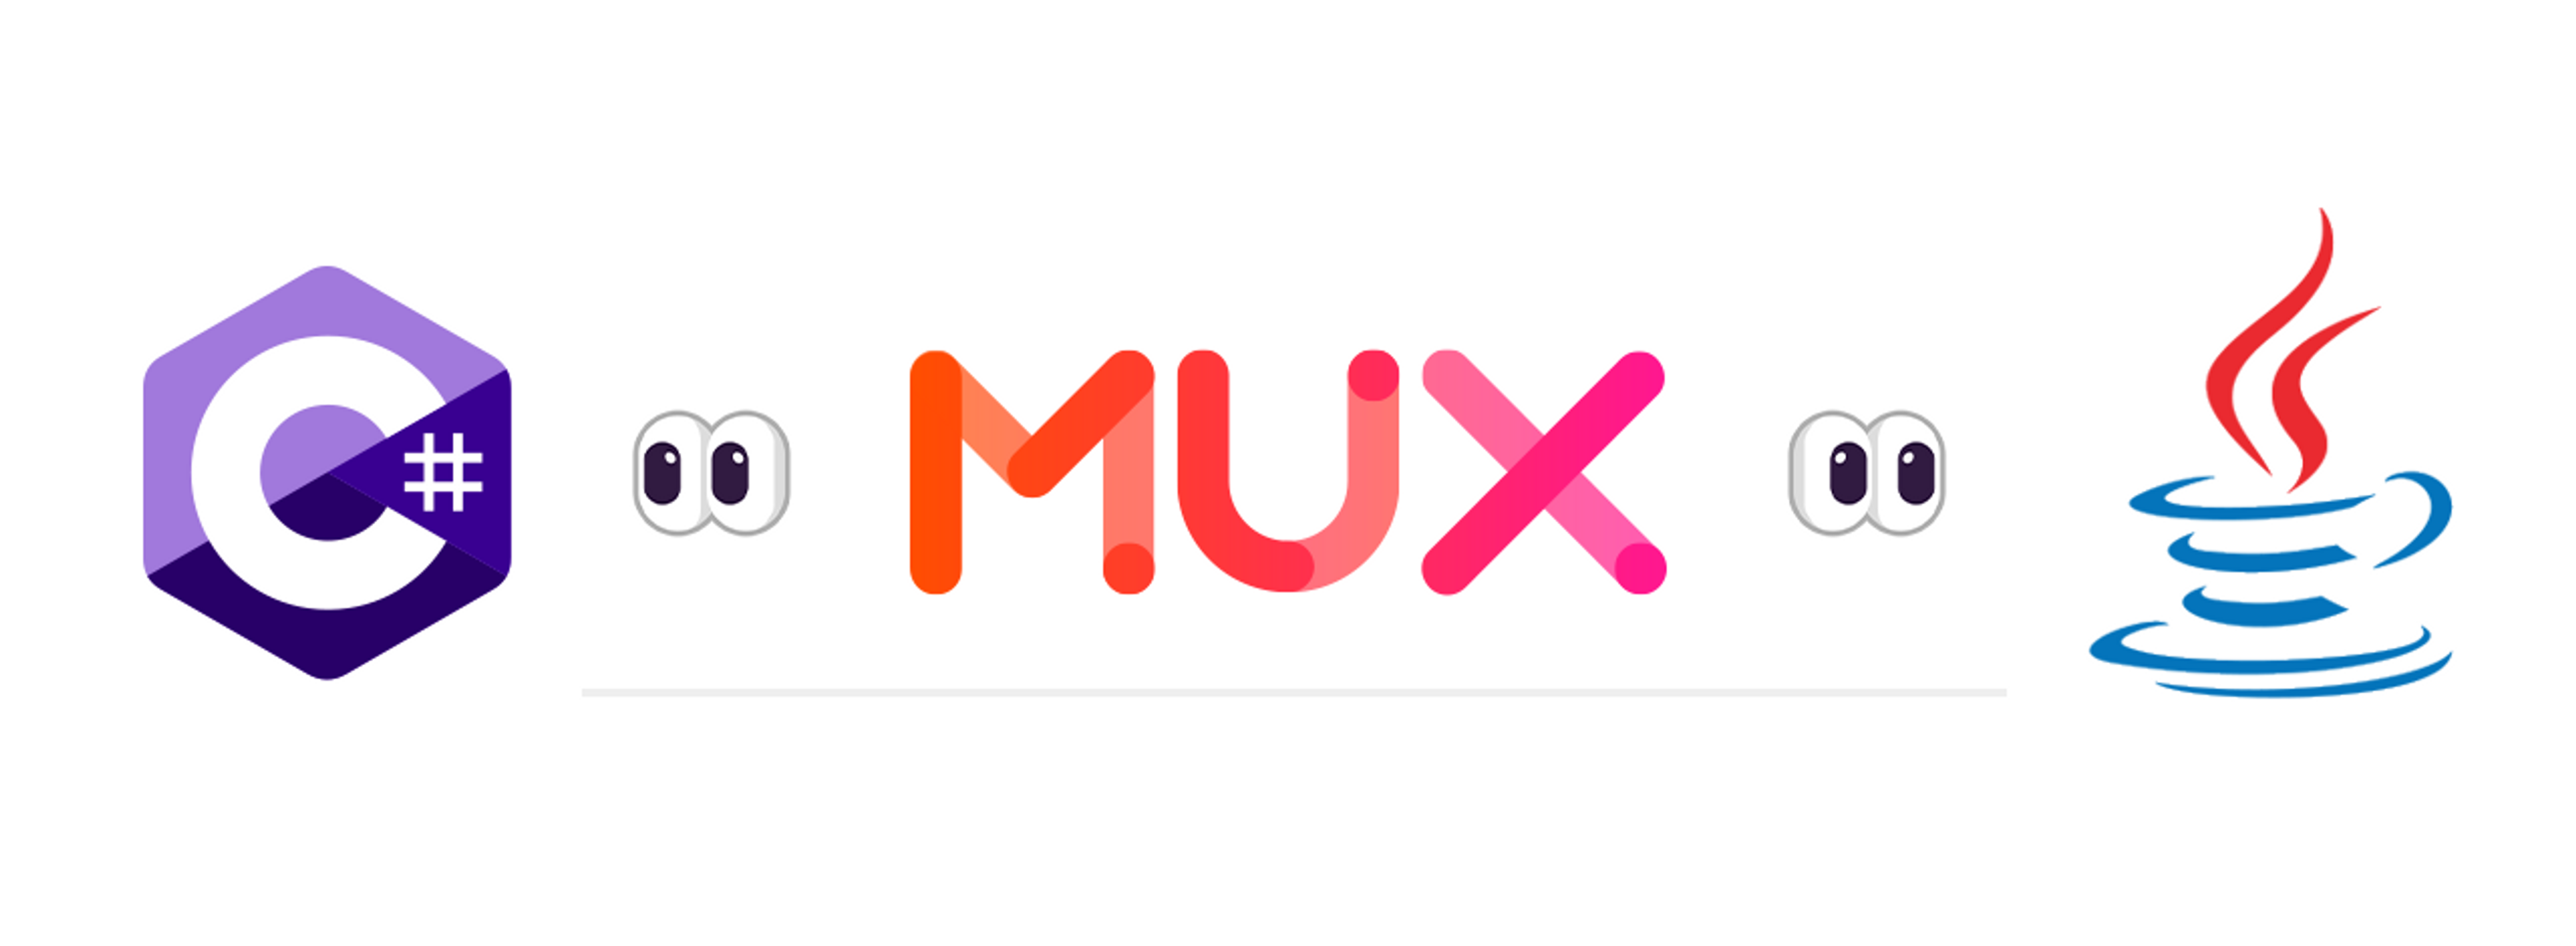 The Mux logo, placed between the C# and the Java logos.